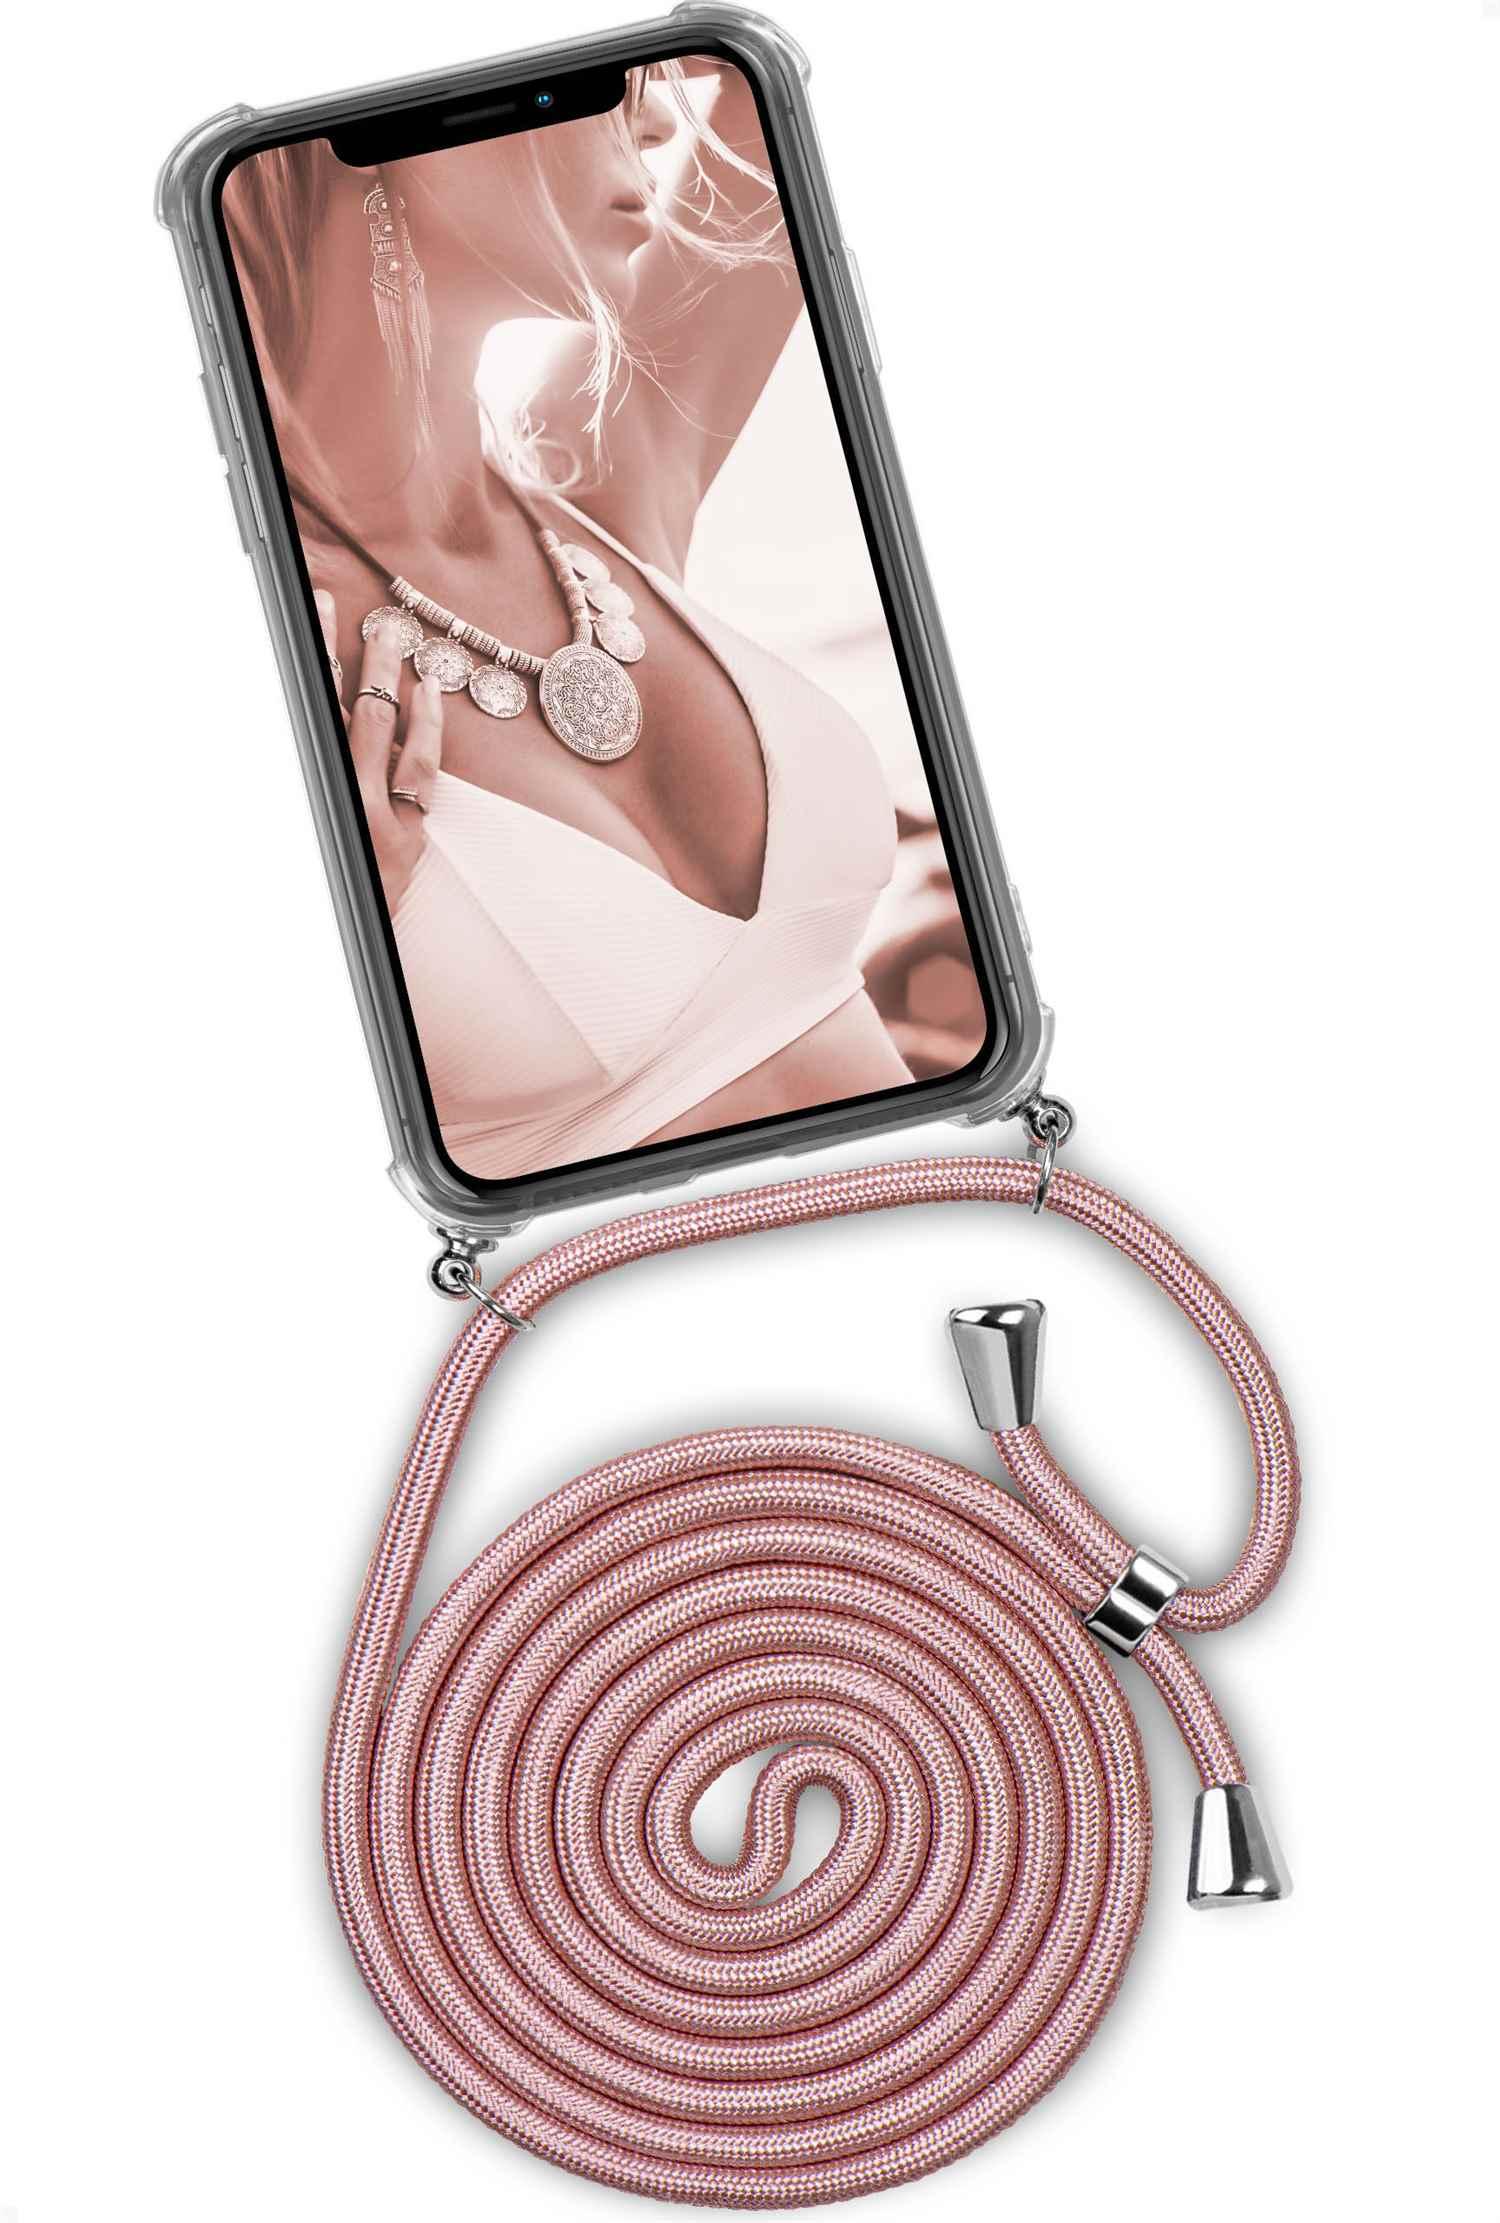 ONEFLOW Twist (Silber) Shiny iPhone 11, Blush Apple, Backcover, Case